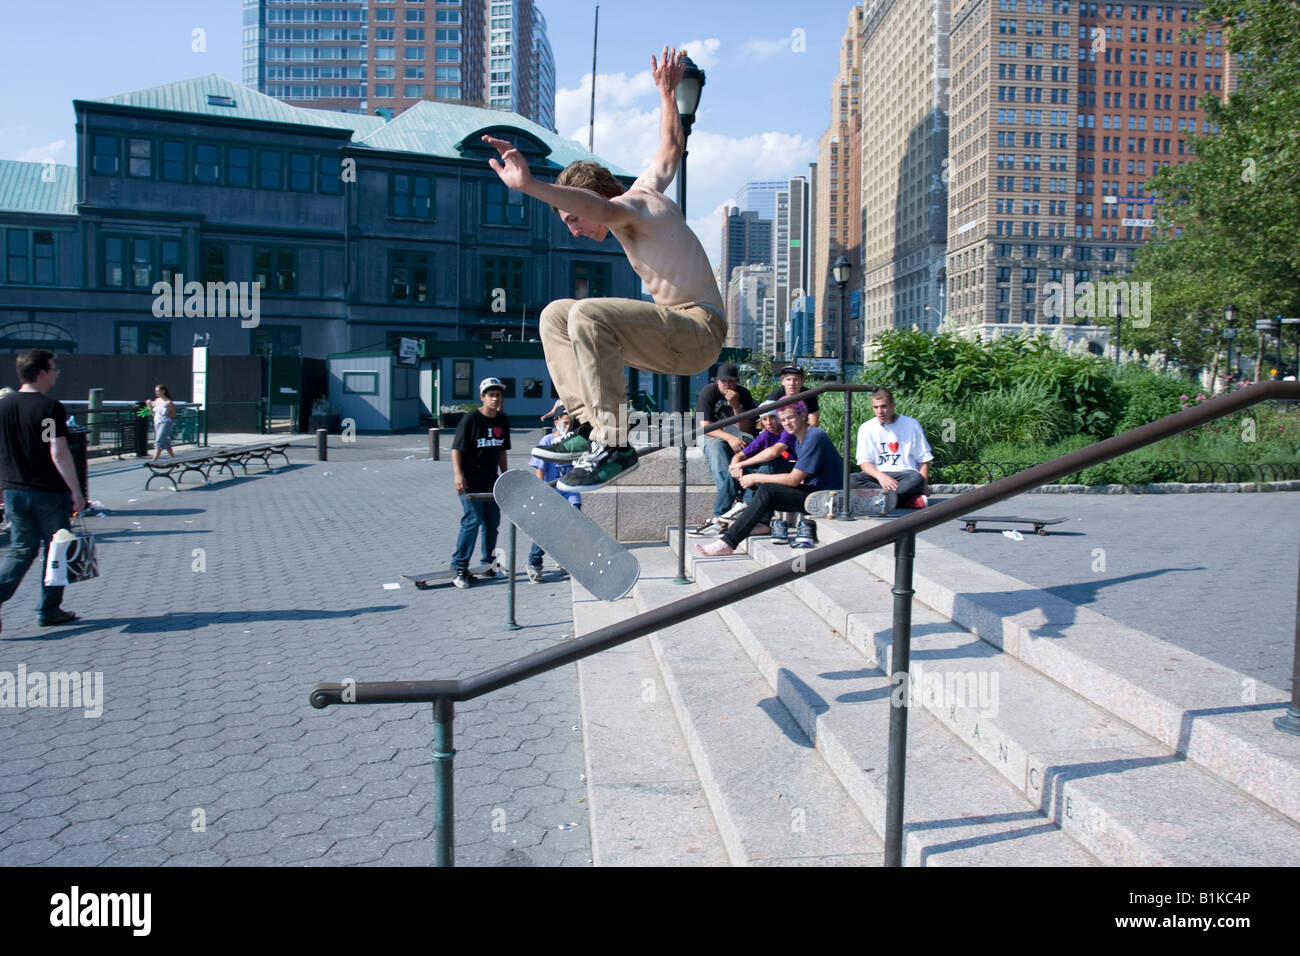 A Skateboarder jumps off some stairs in Battery Park Manhattan, NY. Stock Photo